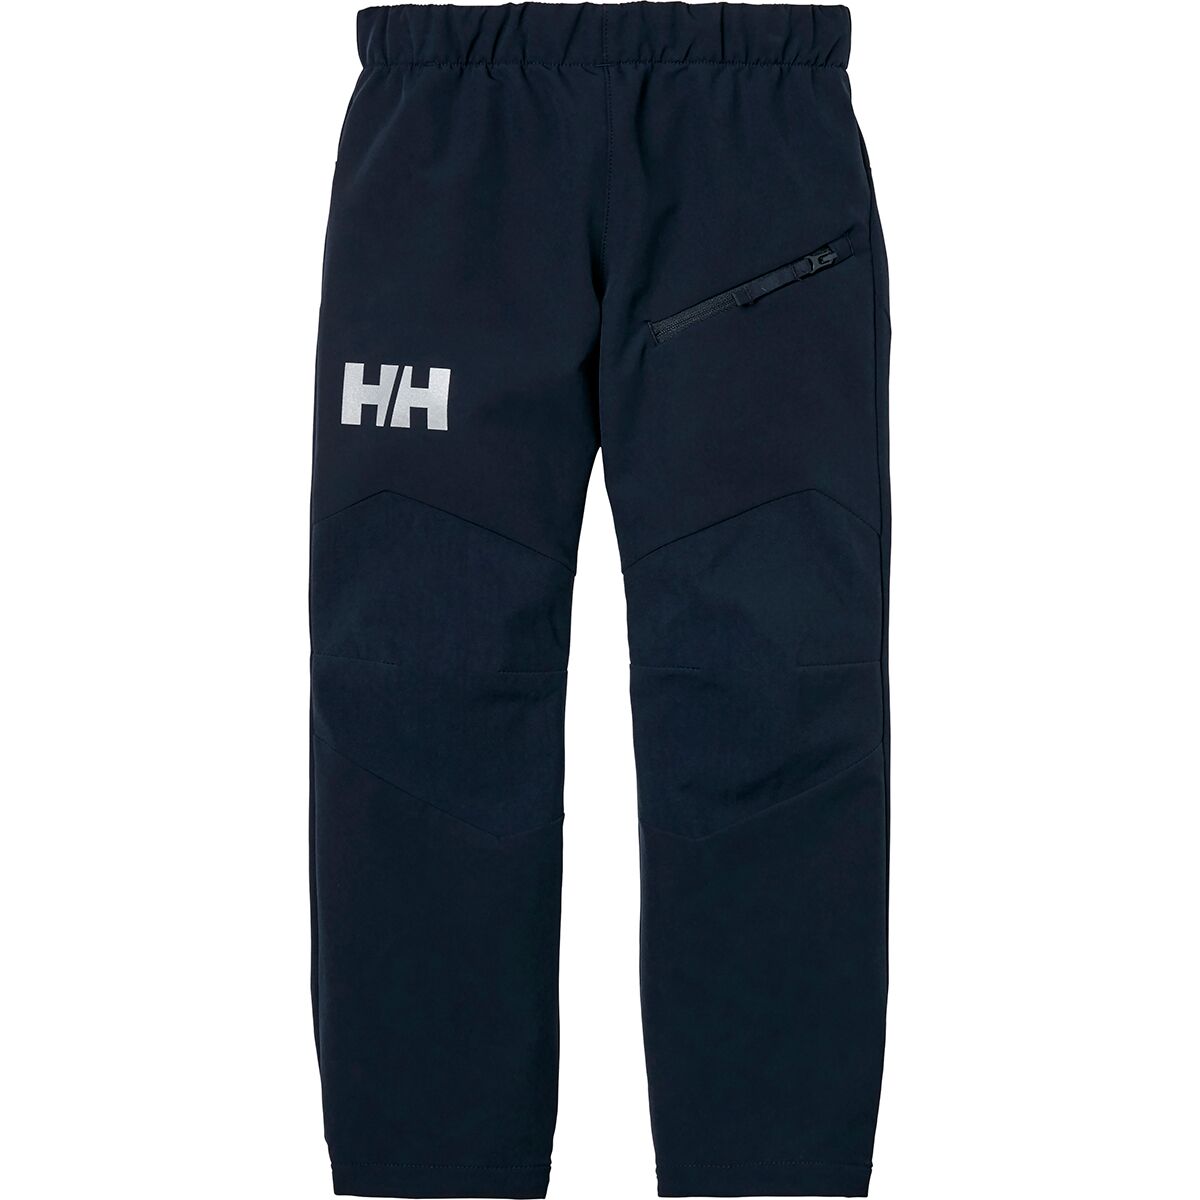 Helly Hansen Dynamic Pant - Toddlers'